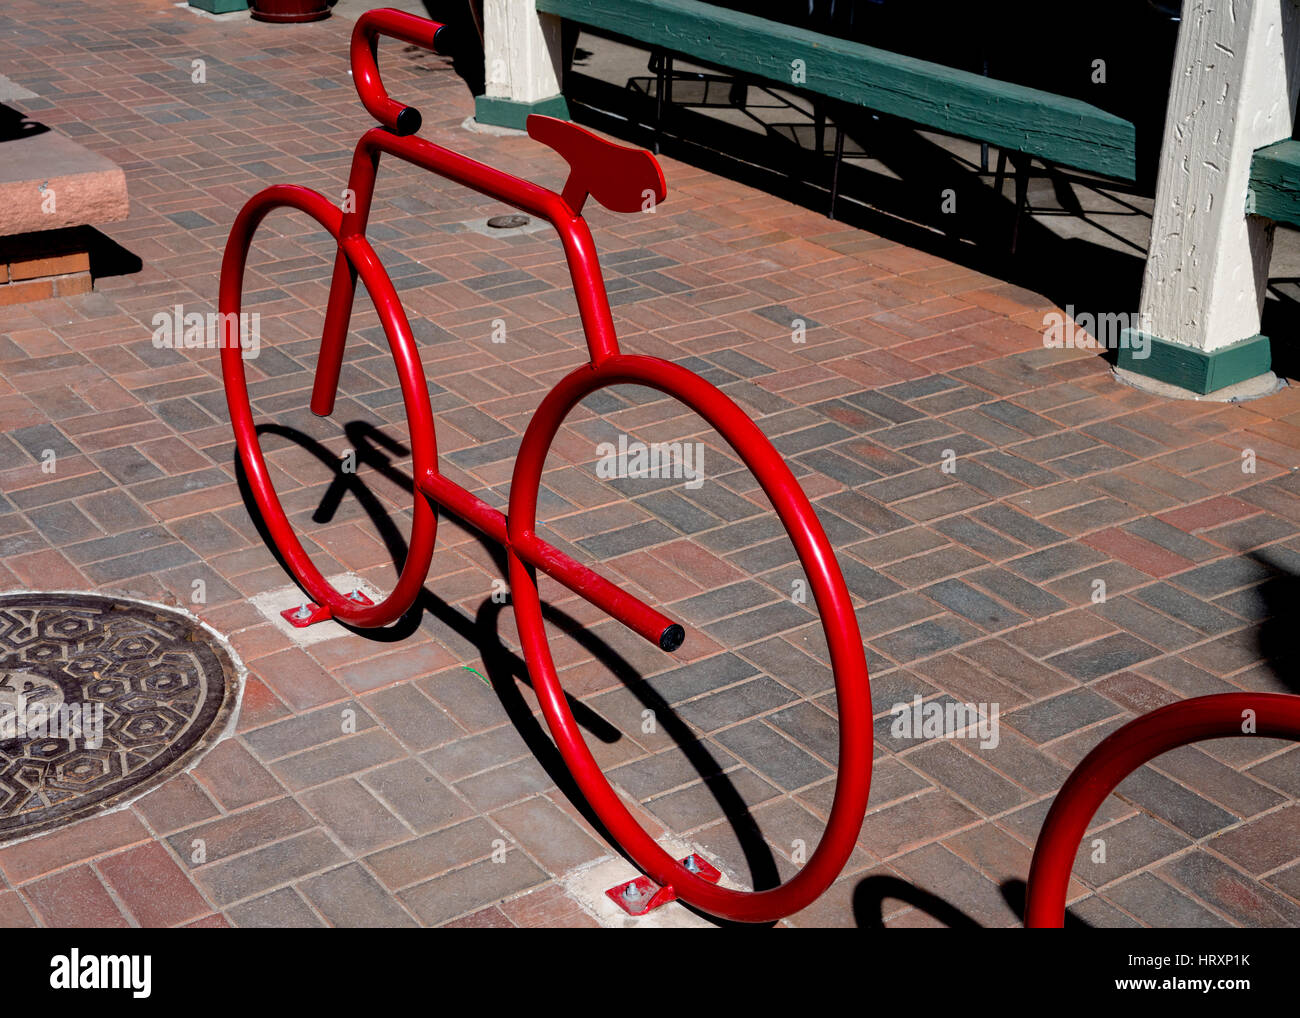 Red bicycle stand in Golden Colorado Stock Photo